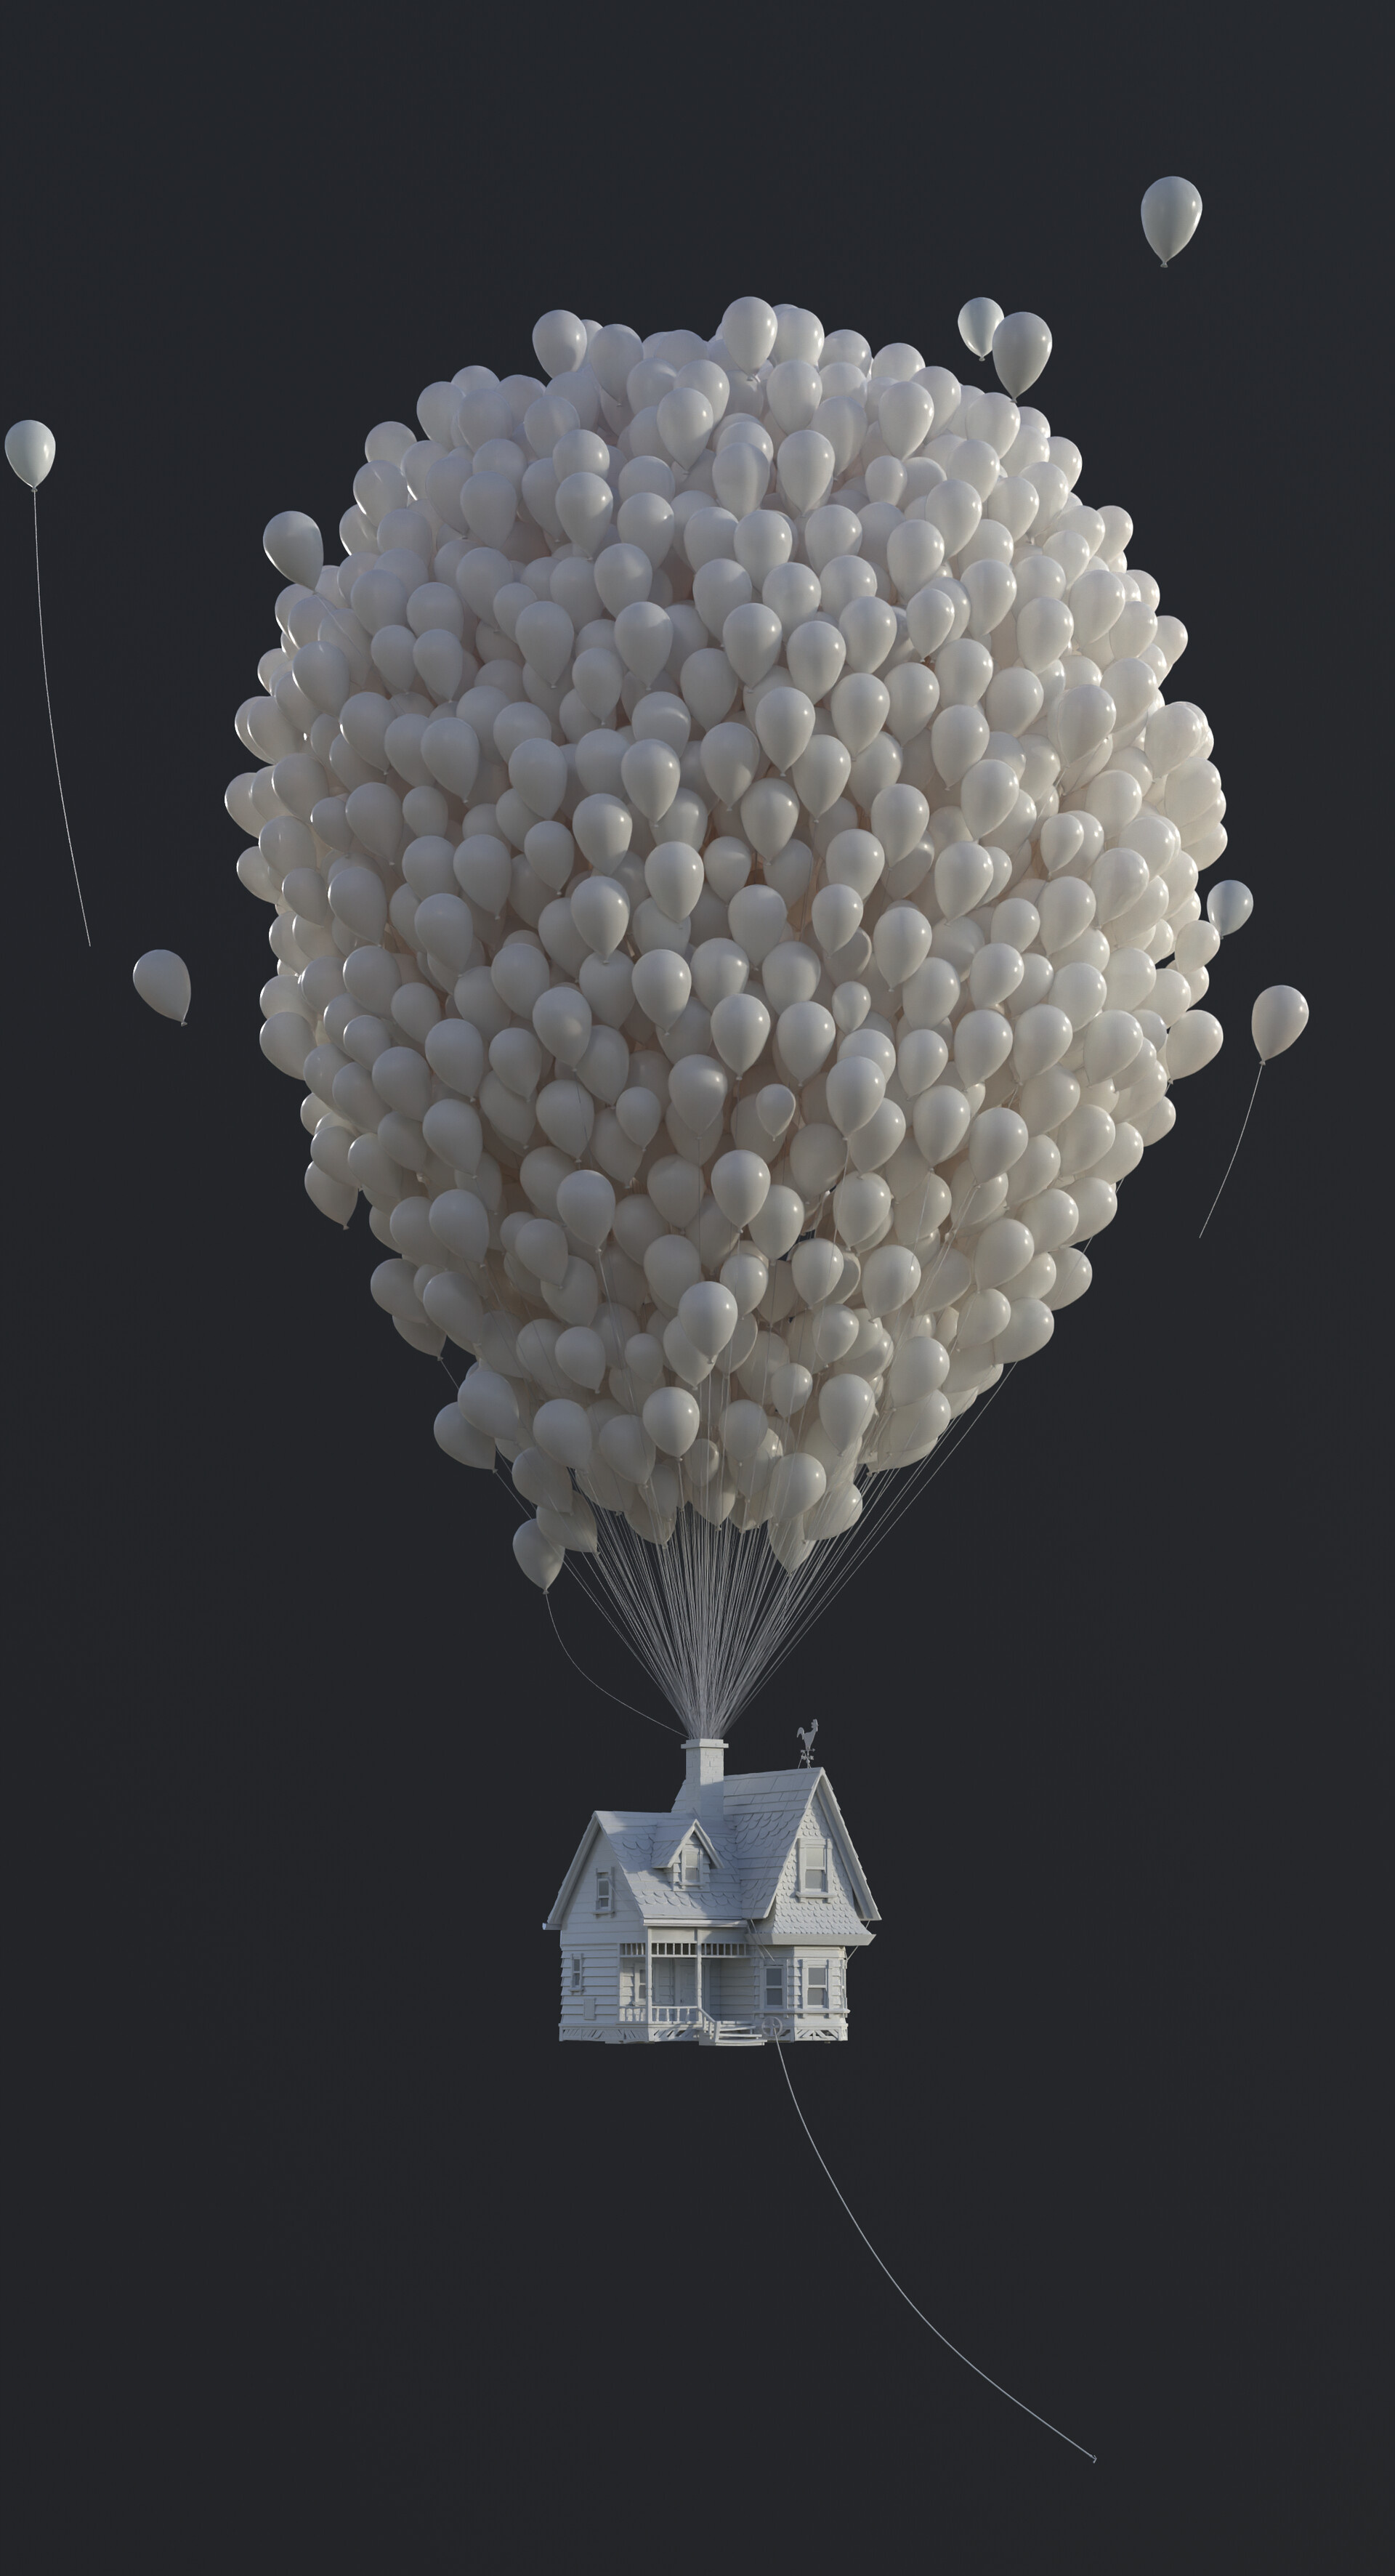 Cluster Ballooning: Cluster ballooning house 3D model, Up computer-animated film, Walt Disney Pictures 2009. 1920x3550 HD Wallpaper.